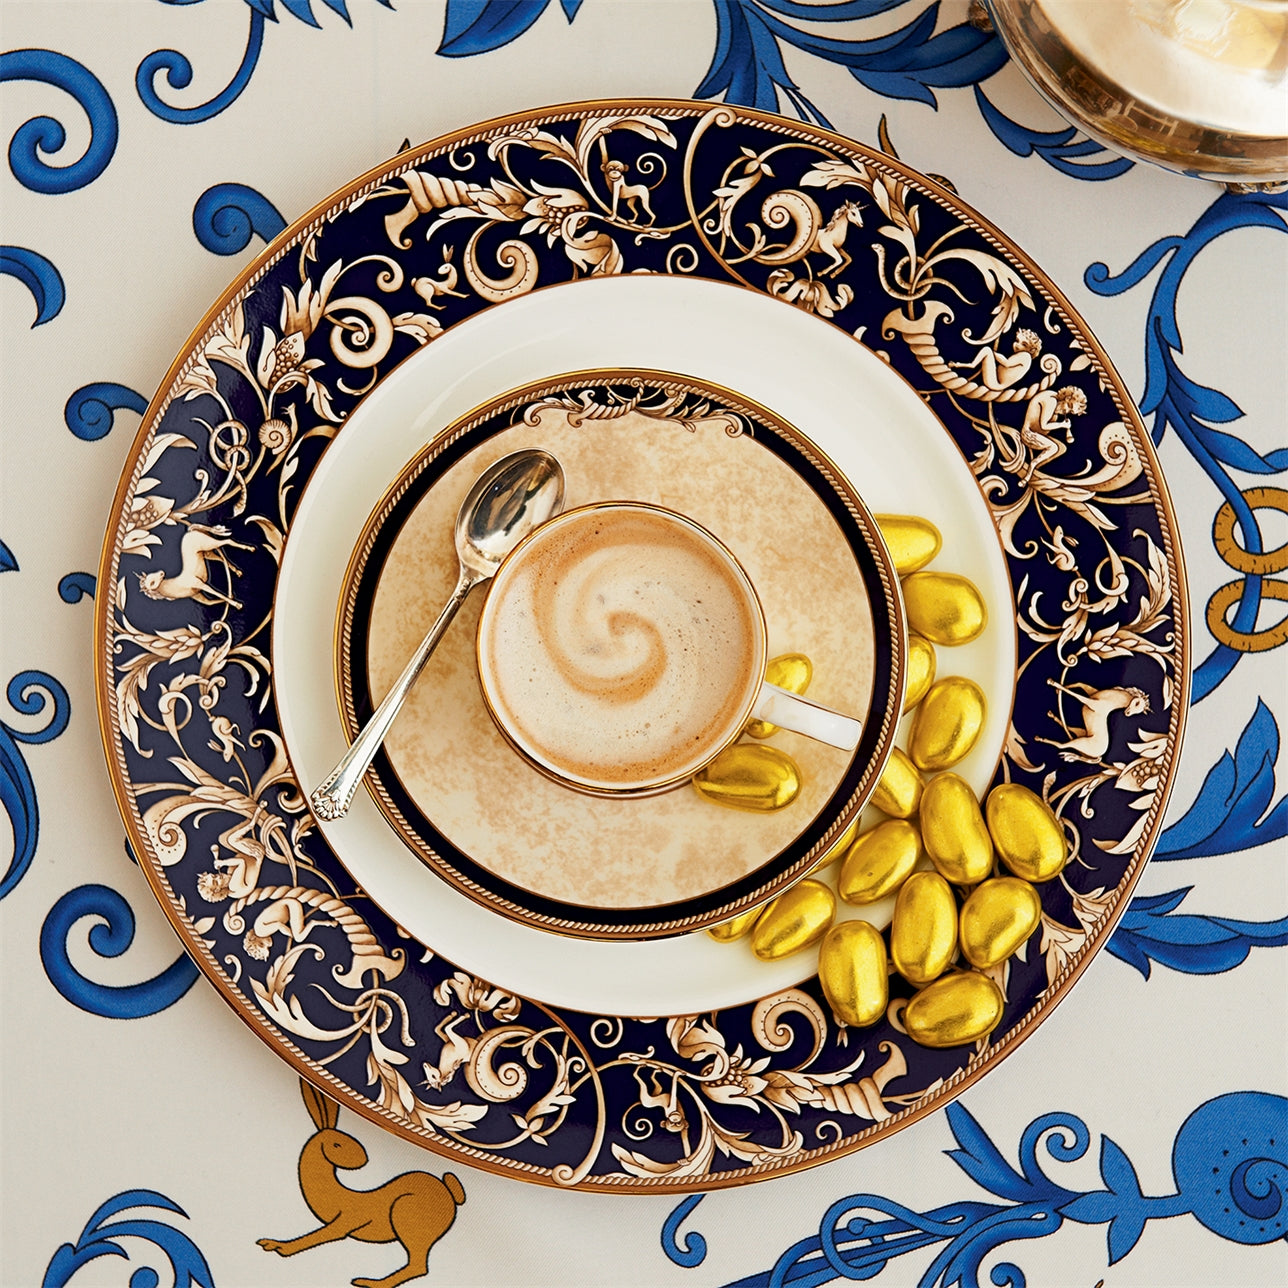 Cornucopia Dinner Plate Accent 27cm by Wedgwood  Wedgwood Cornucopia is inspired by the mythical 'Horn of Plenty,' and is characterized by designs featuring legendary creatures like unicorns and satyrs.